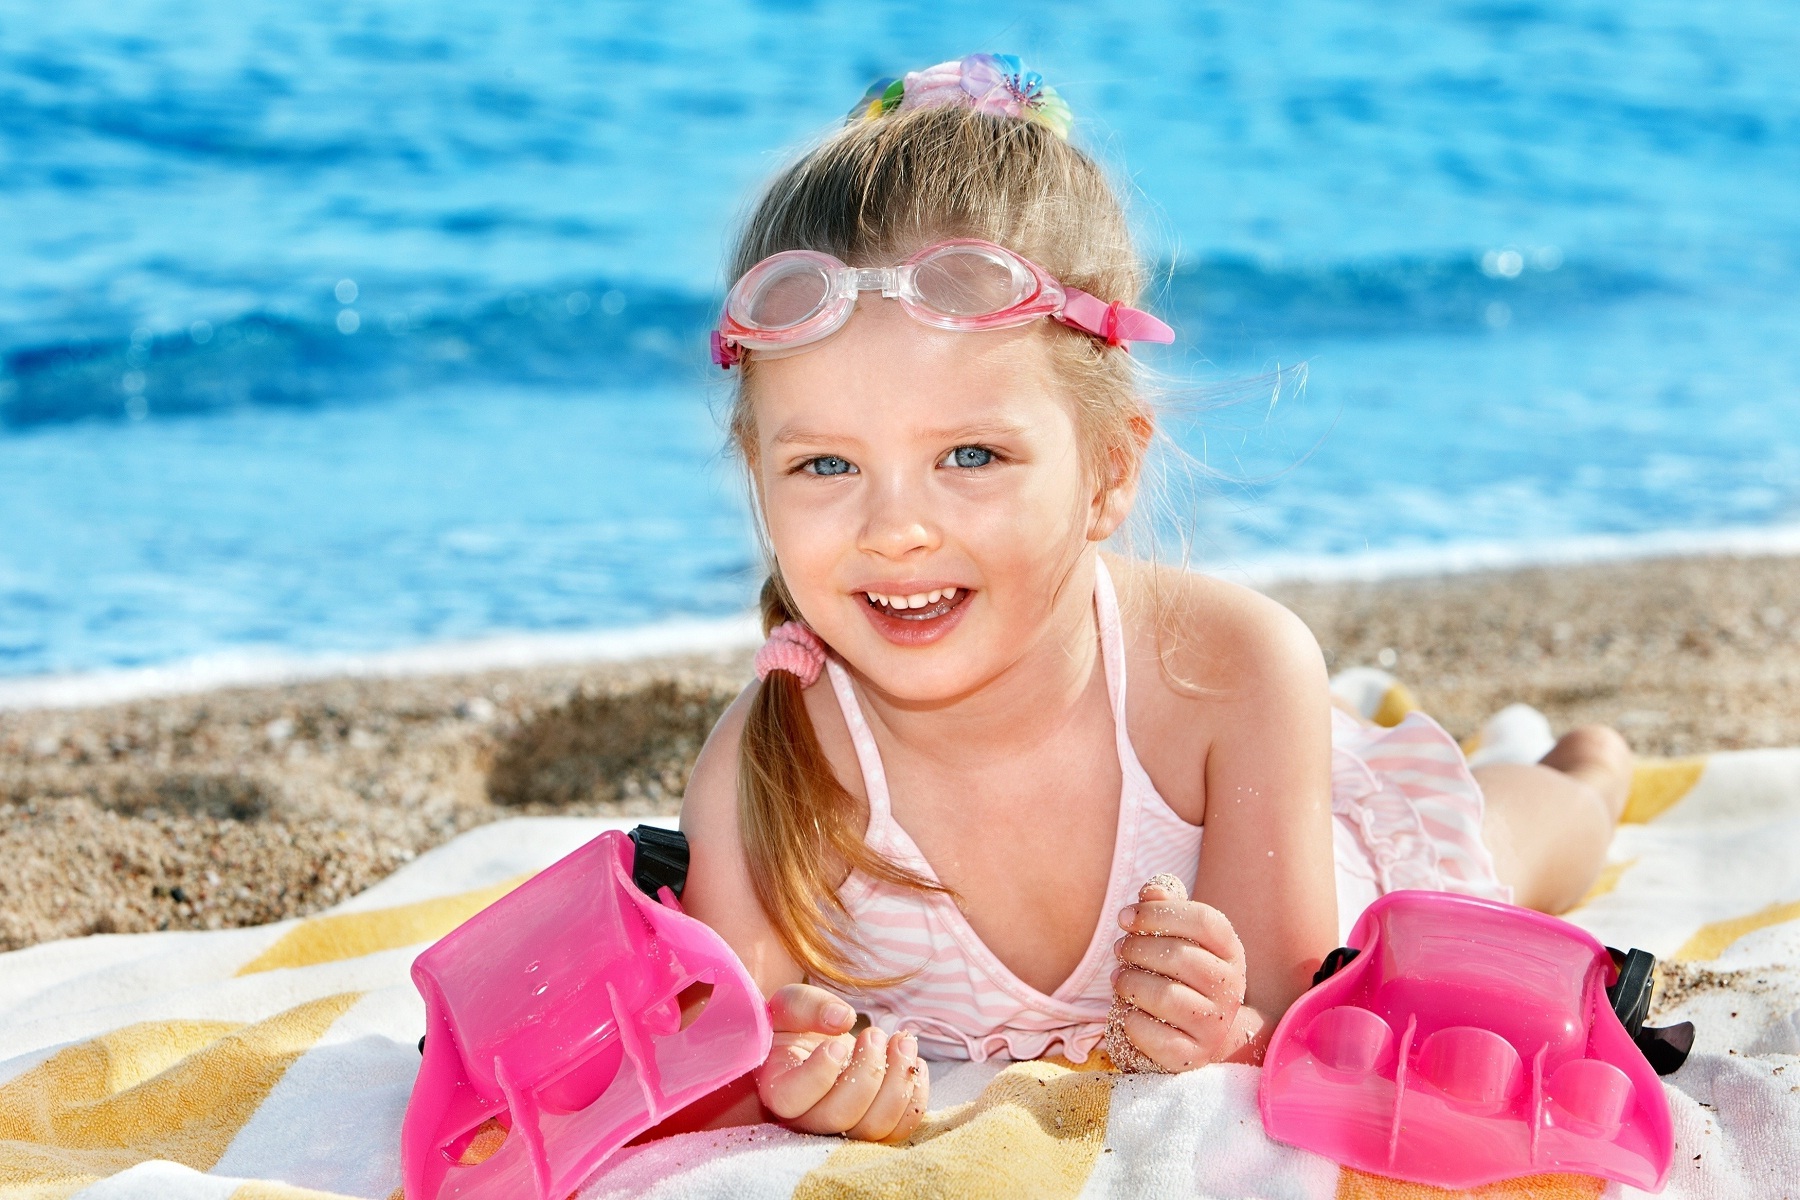 Smiling face of cute baby girl on beach